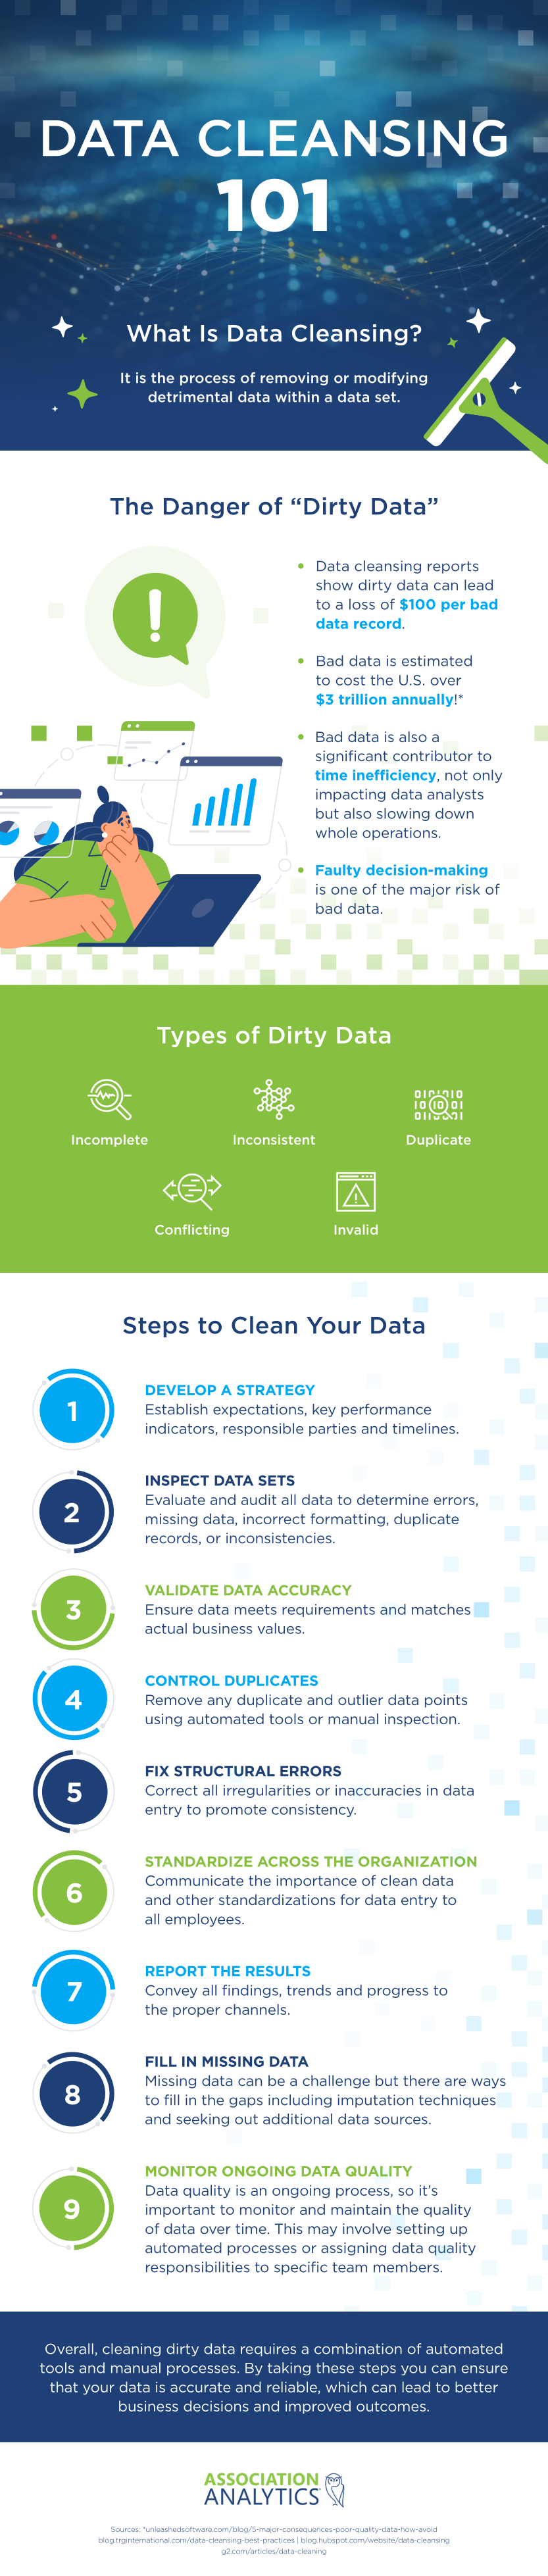 Association Analytics infographic exploring data cleansing and how it works